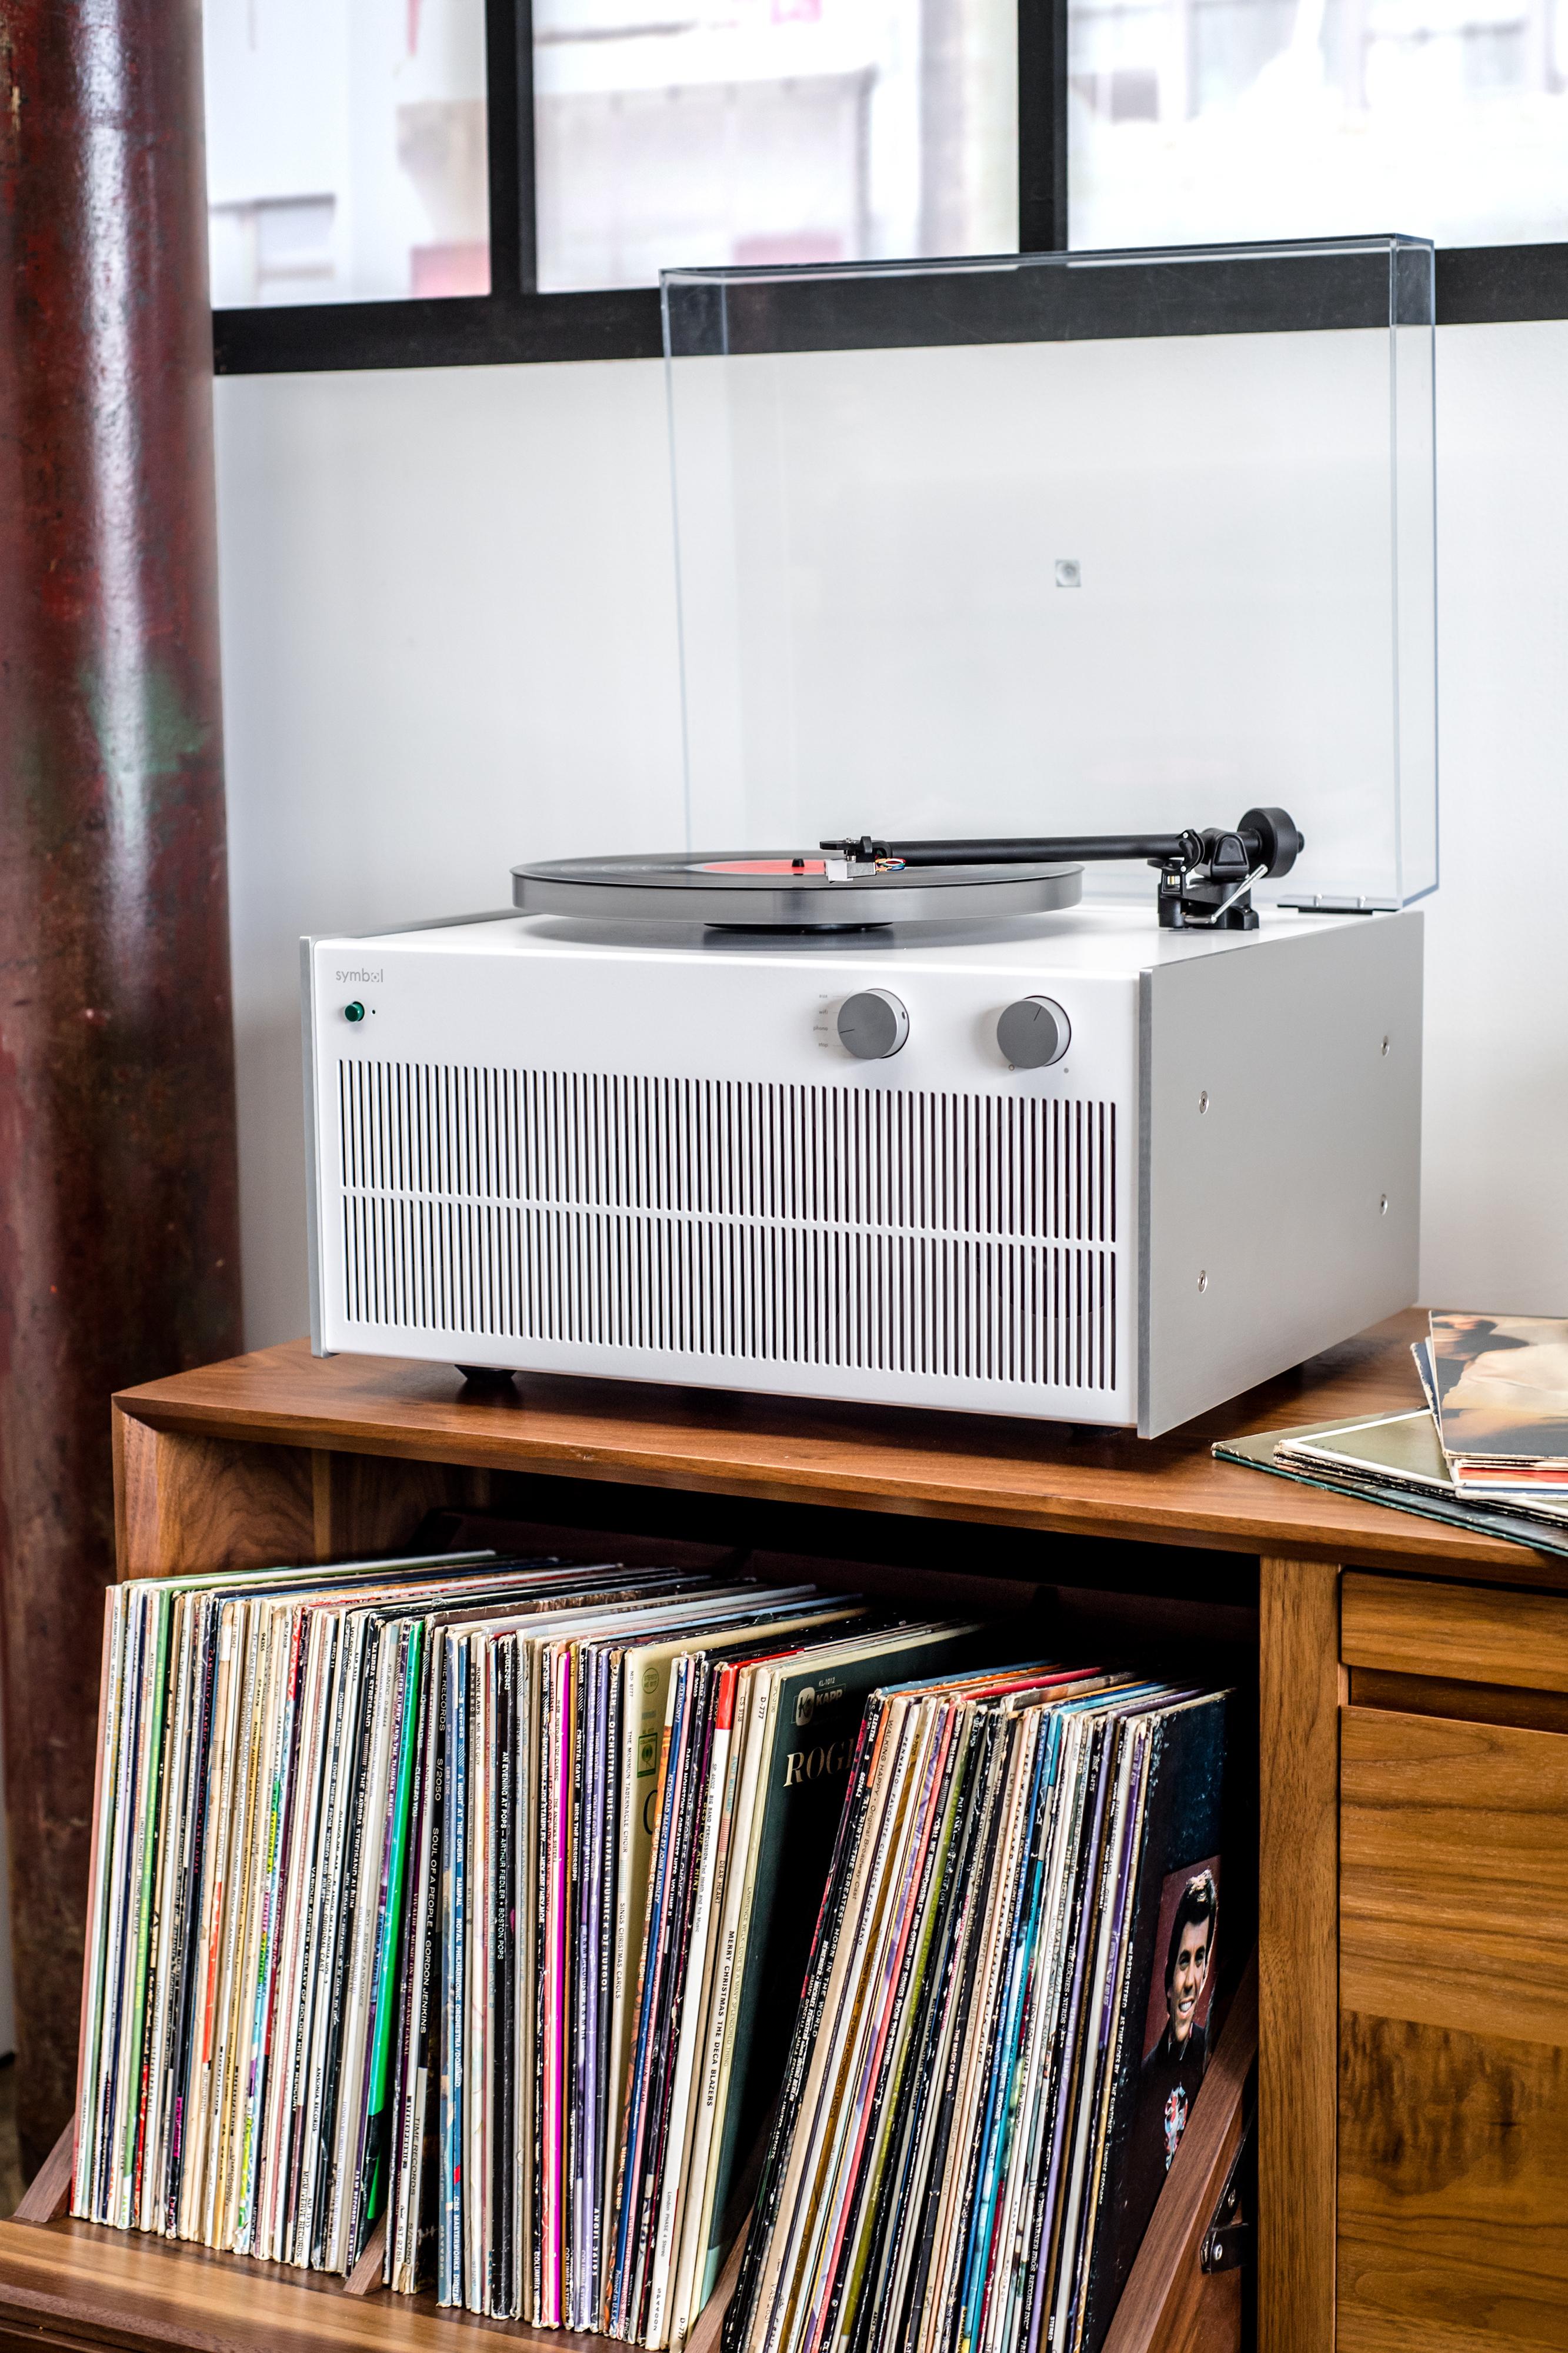 Symbol Audio's Modern Record Player is a first-of-its-kind, ultra-high fidelity audiophile quality record player. The design features custom speakers and an integrated amplifier with the added ability to stream wirelessly. 

The Modern Record Player